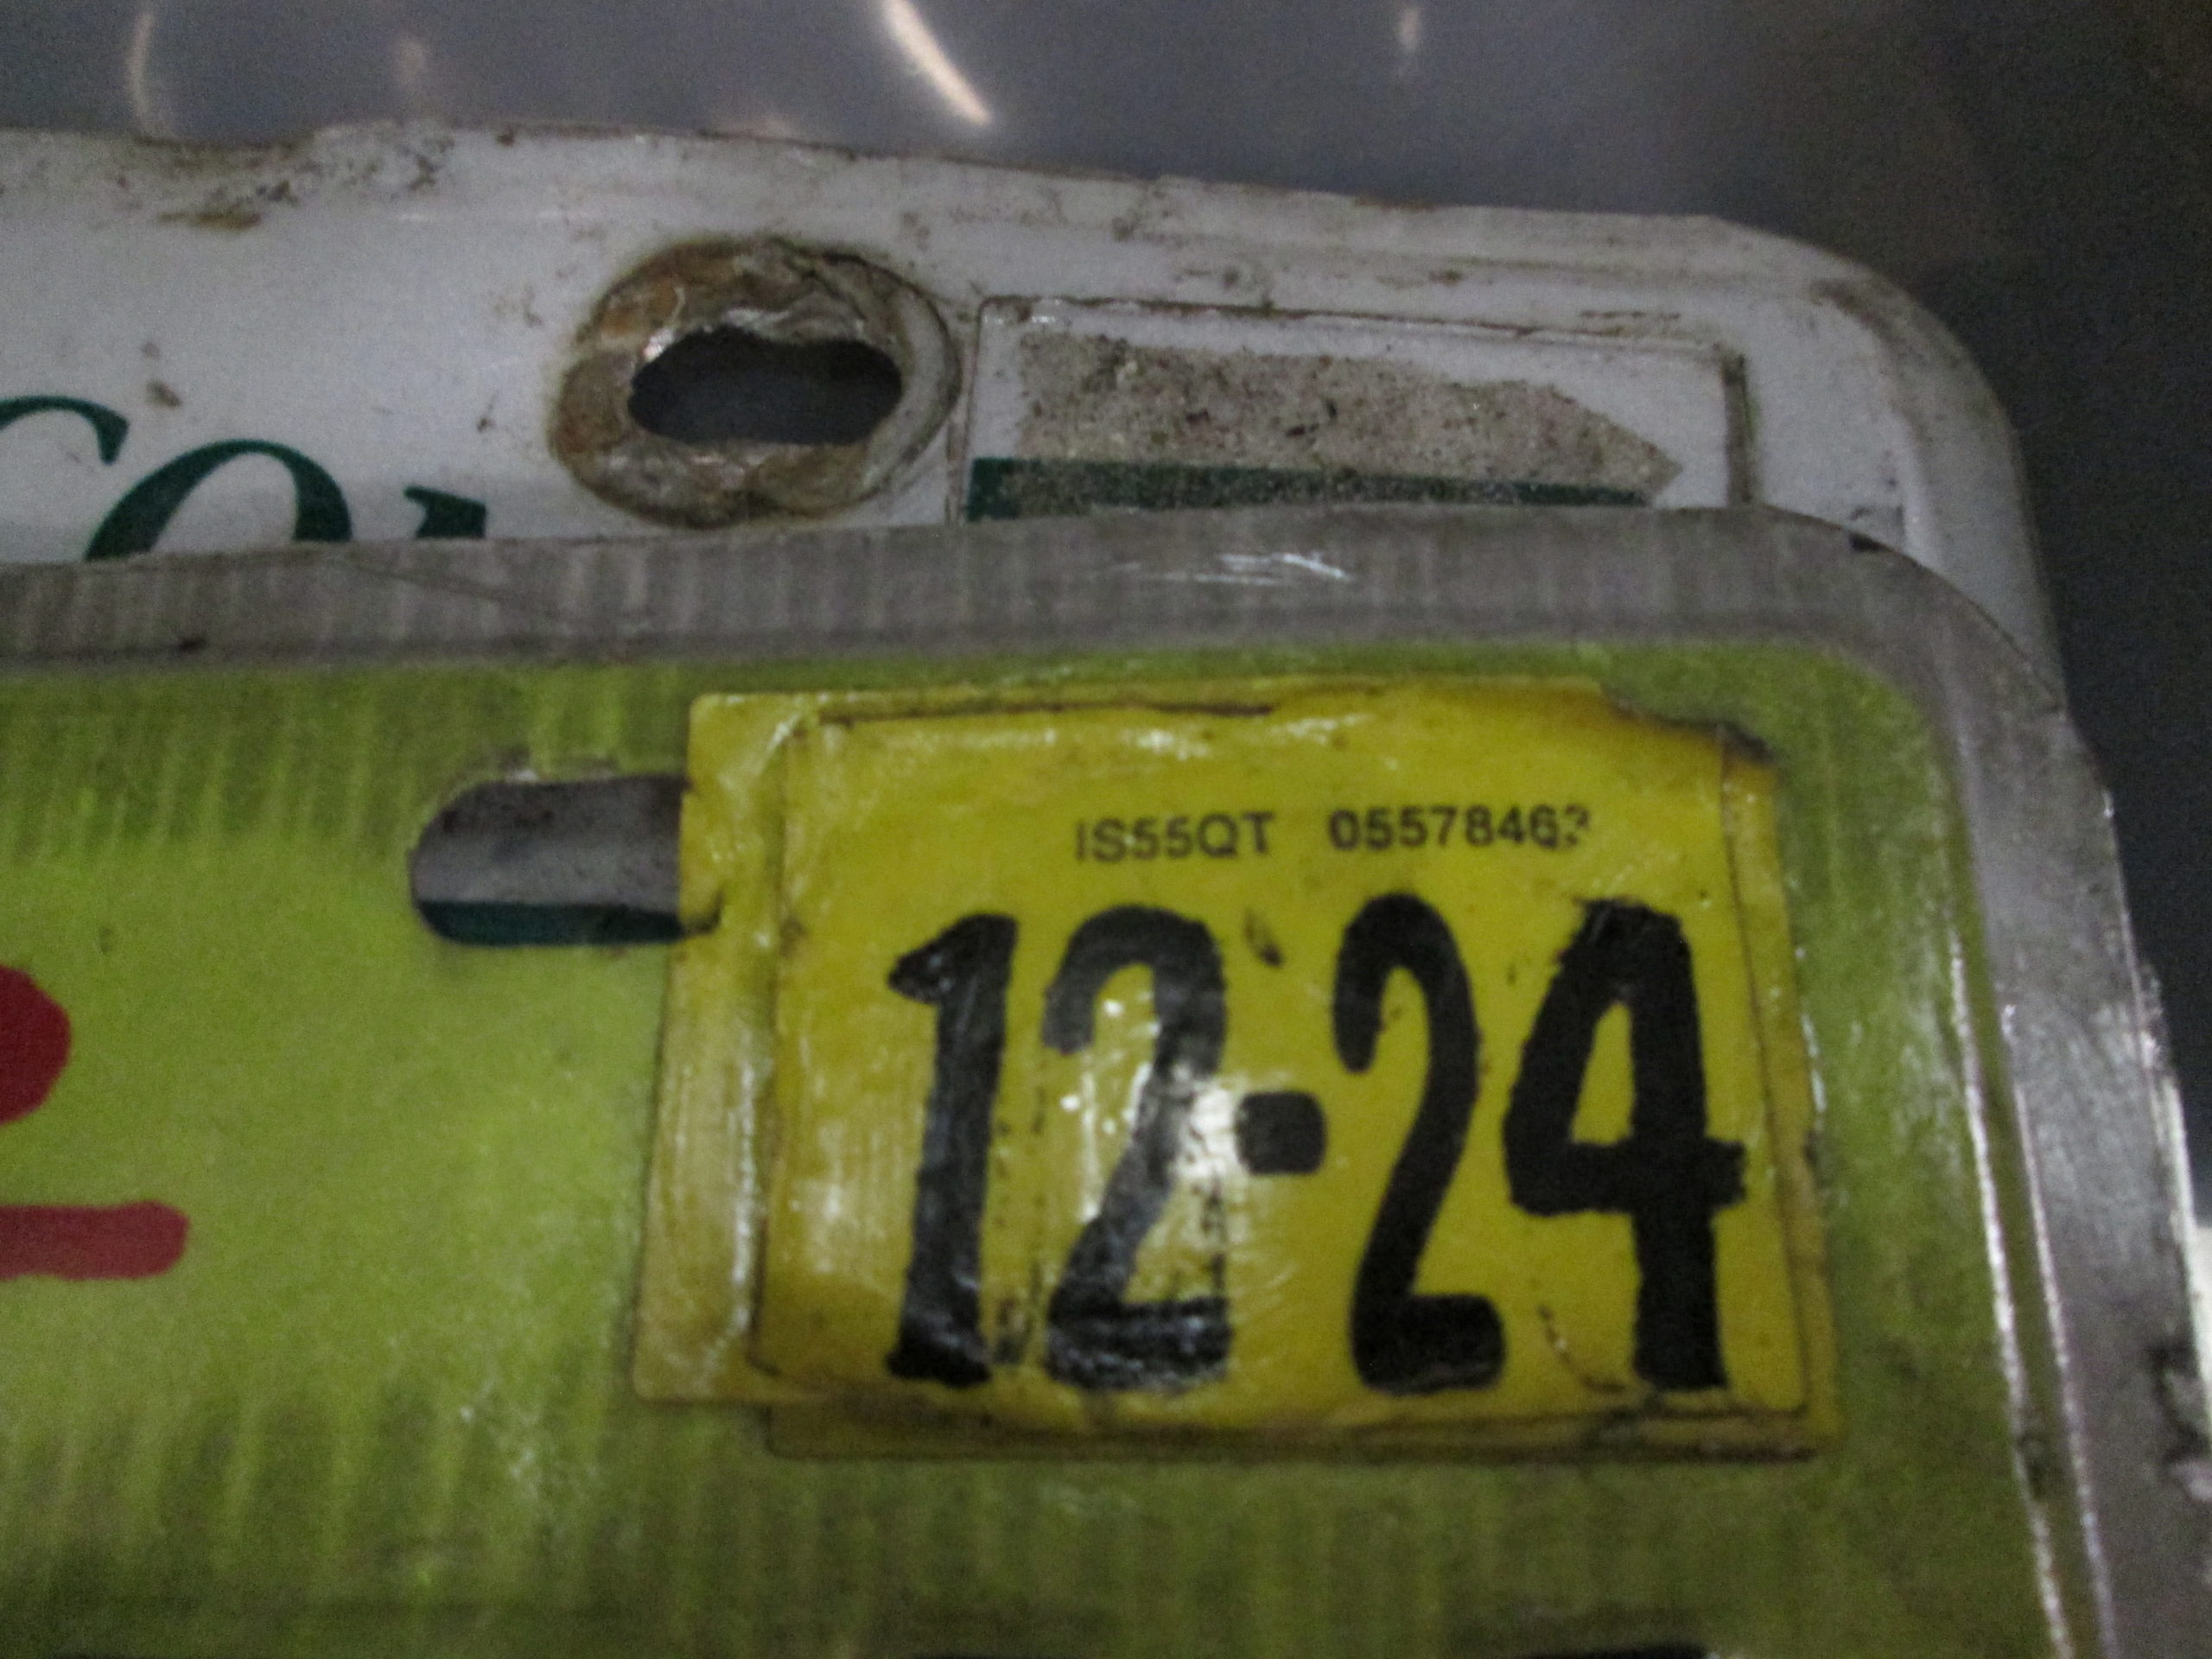 Unlicensed Driver Carrying Meth Tries to Fool FCSO with Permanent Marker to Change Tag Expiration Date